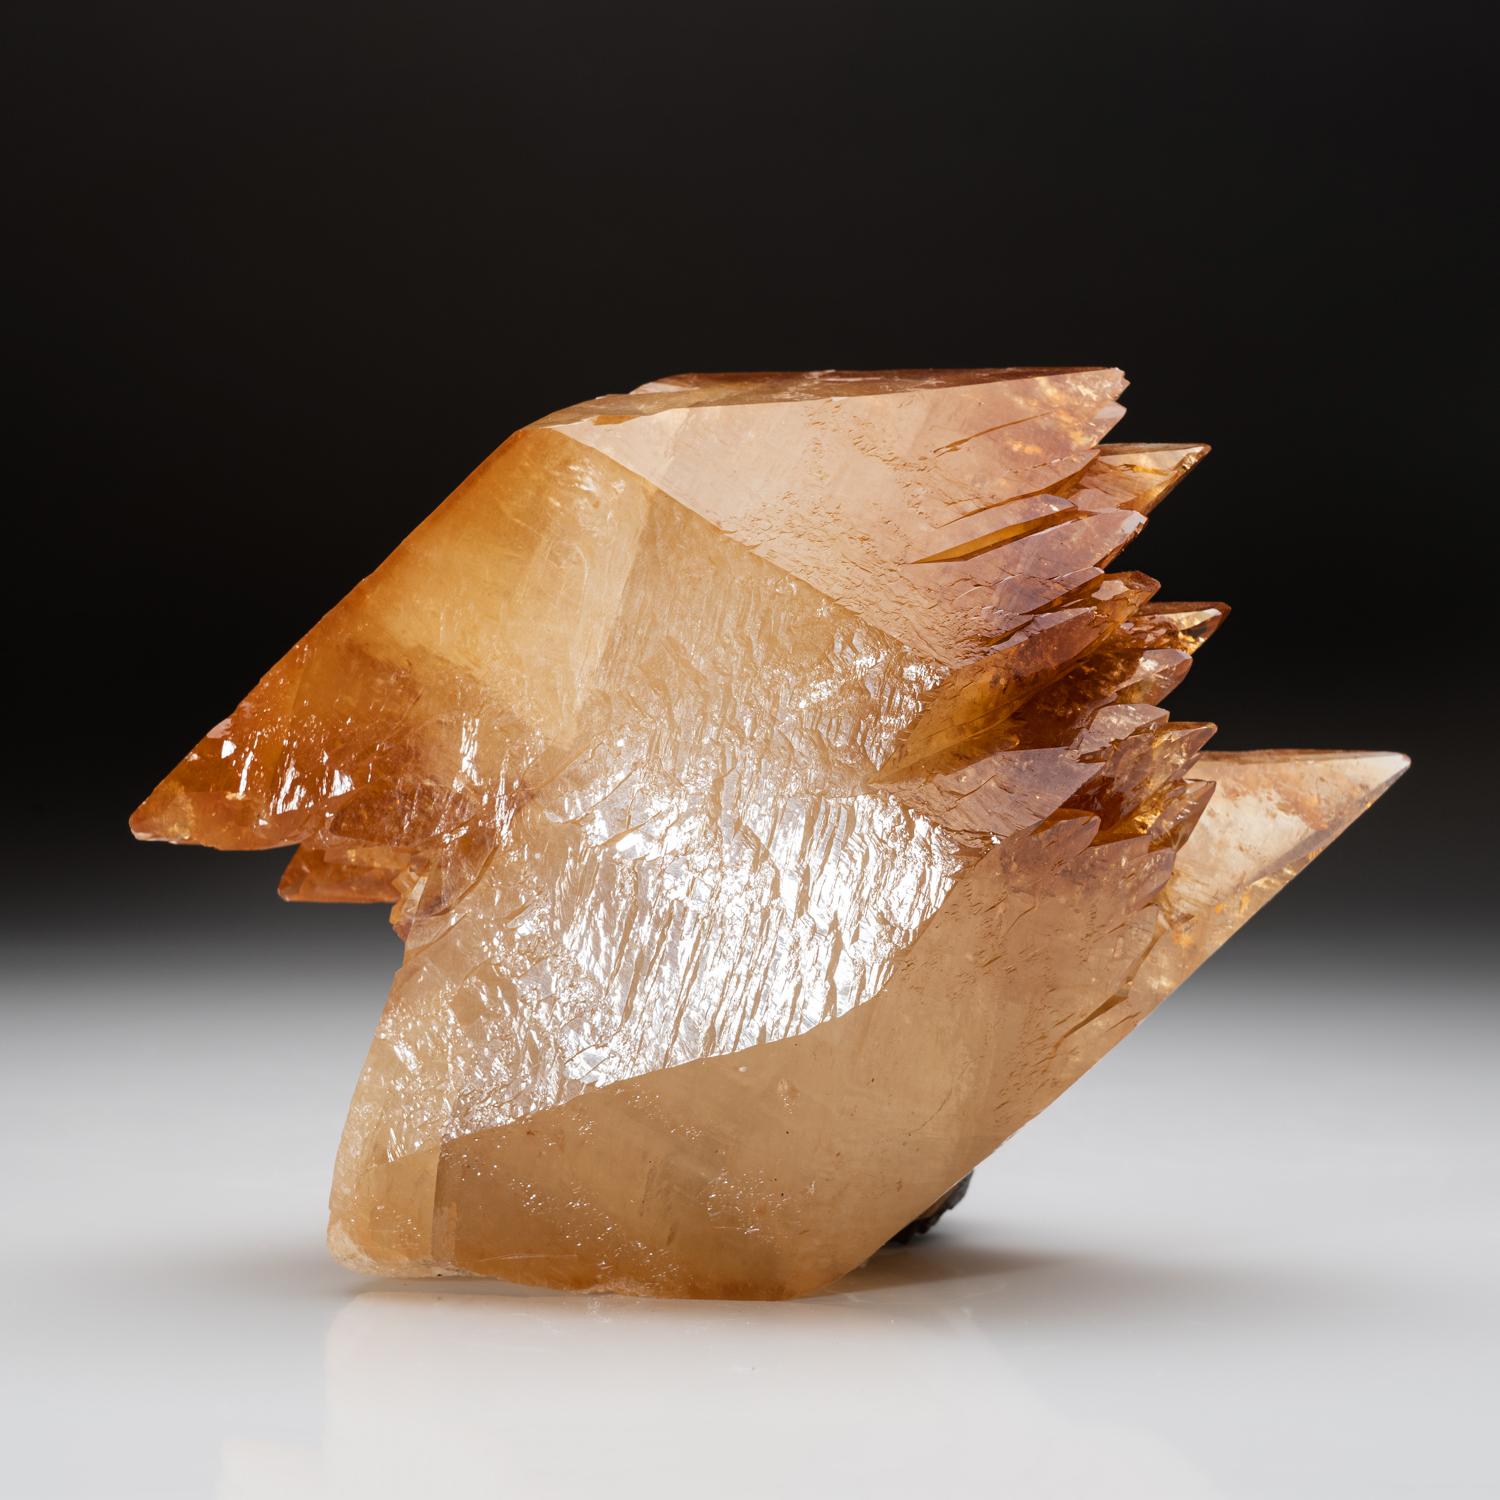 Lustrous transparent deep golden calcite crystal on matrix. Large double terminated scalenohedral twinned on the C-axis with well defined re-entrant faces. Small sphalerite crystal embedded on the back of the specimen.

5.5 lbs, 3.5 x 6.5 x 6.5